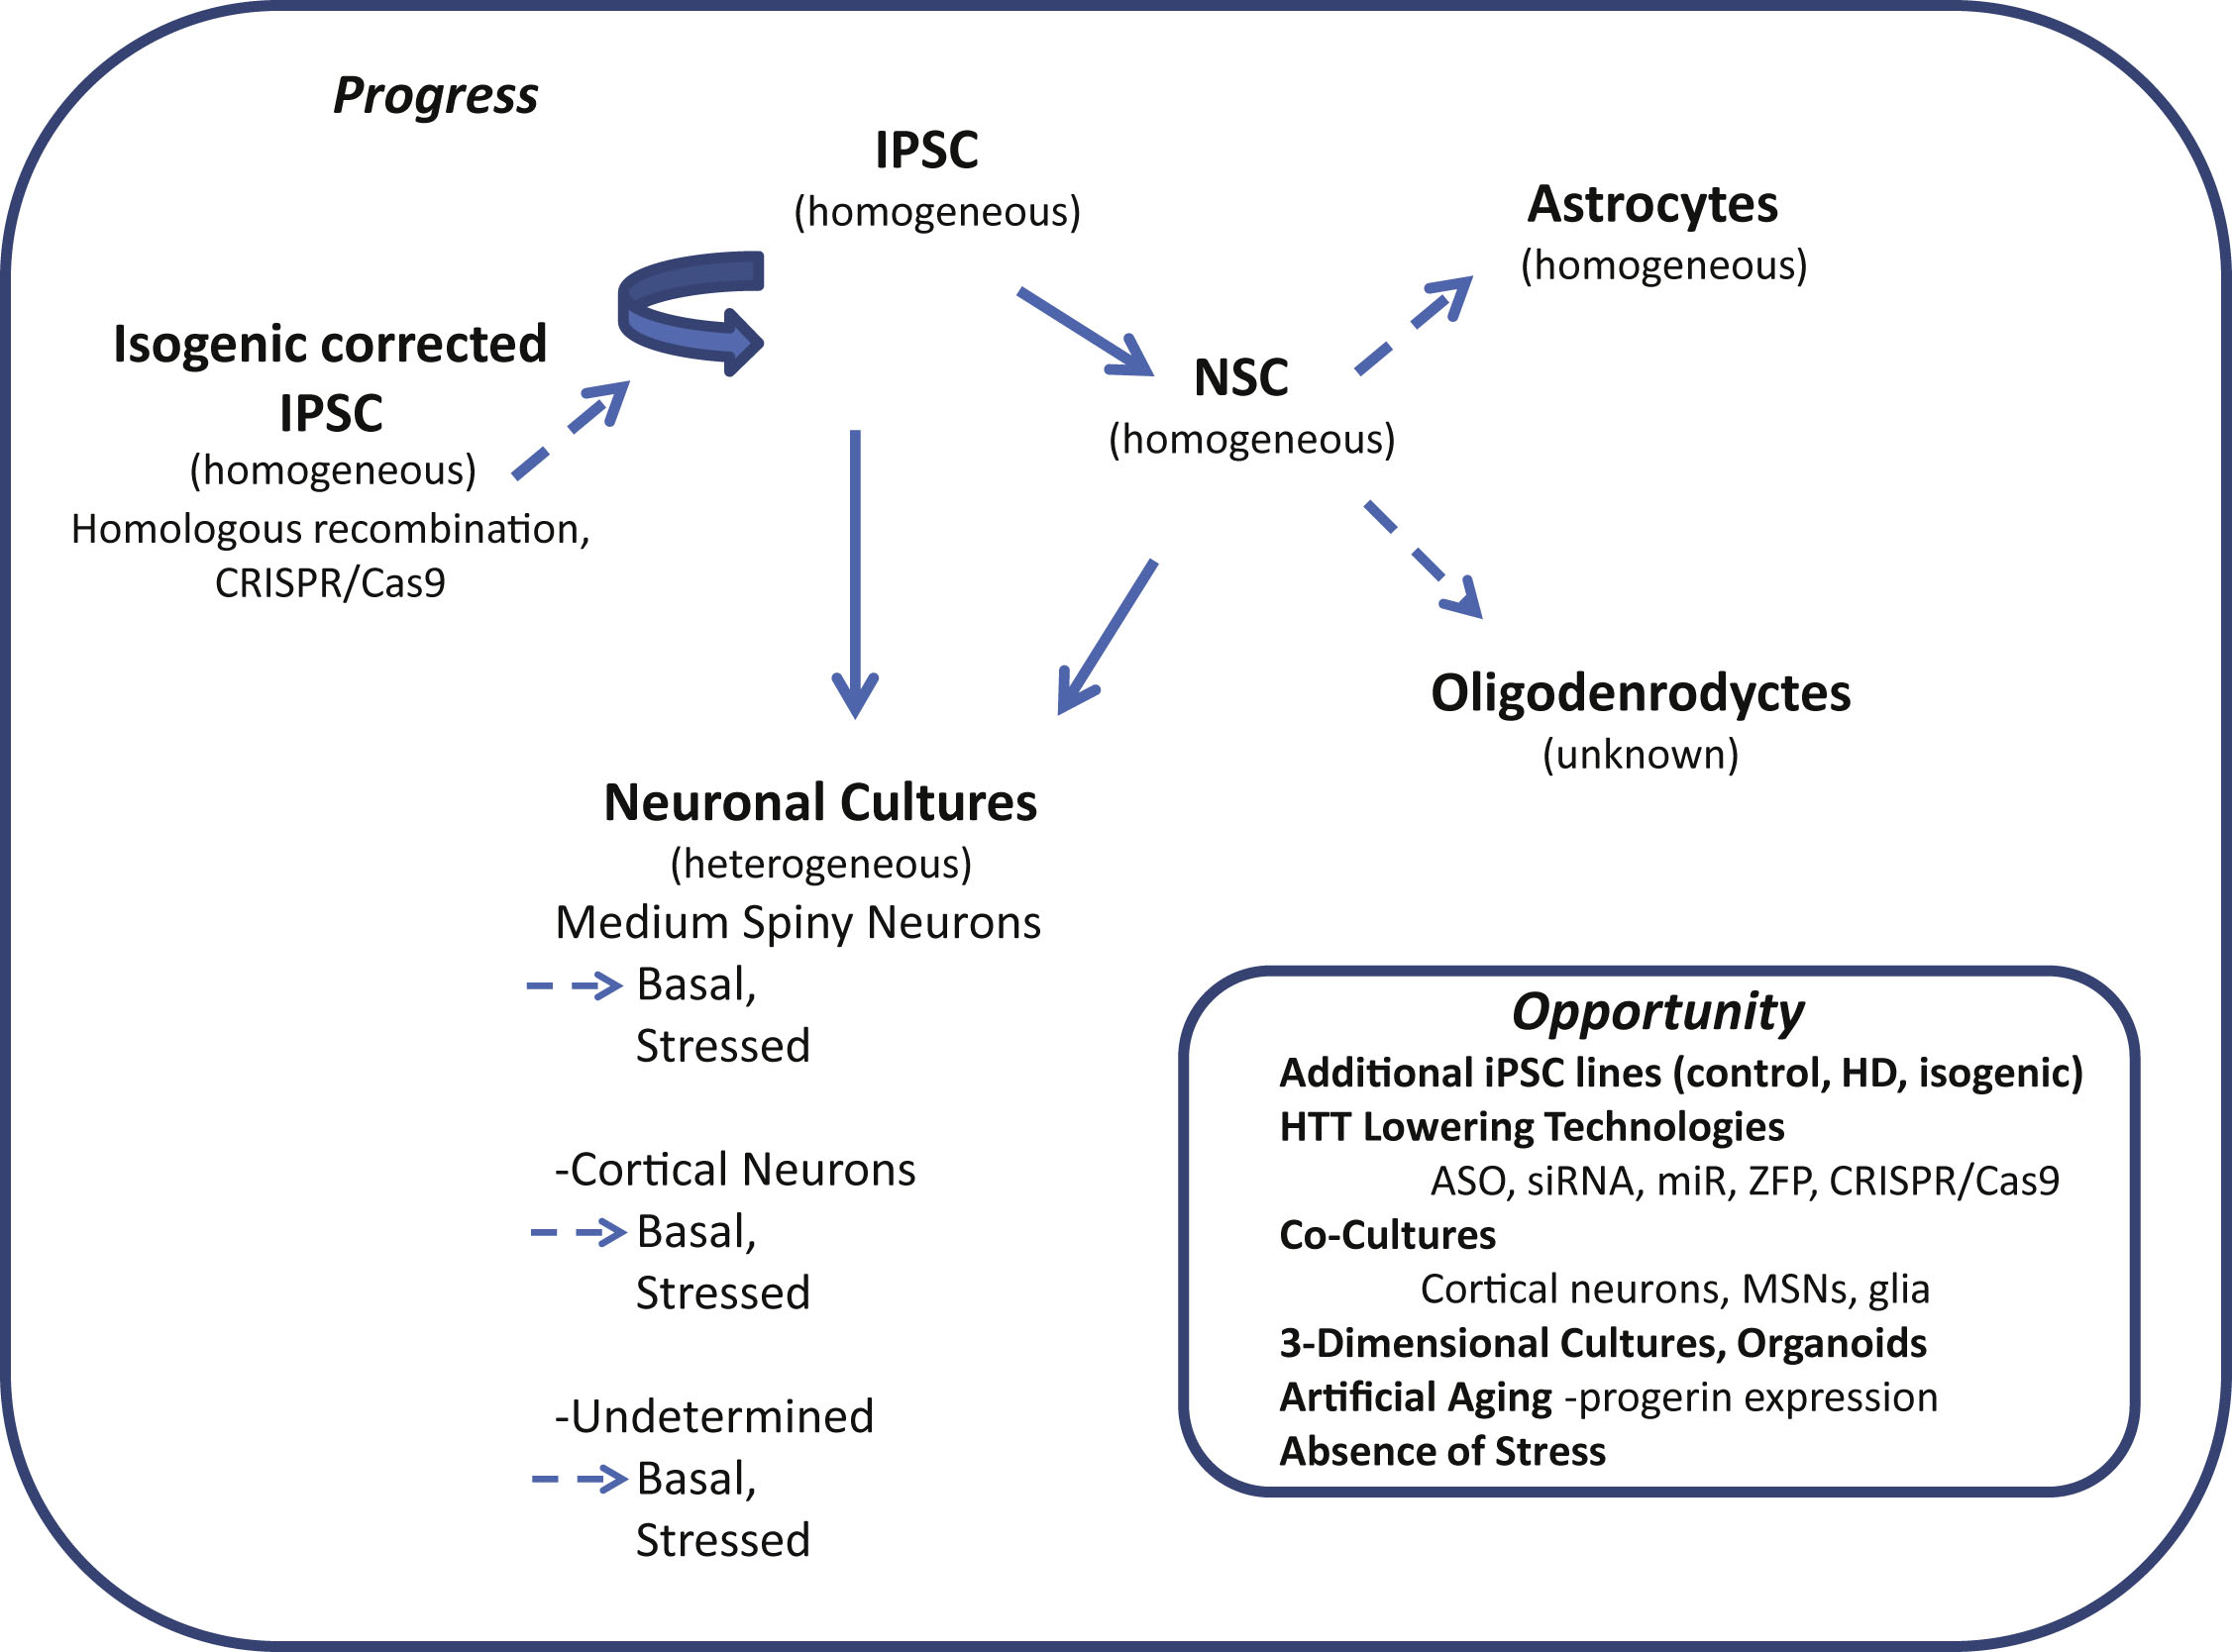 Induced pluripotent stem cells (iPSC) in Huntington’s disease research: progress and opportunity. Schematic shows cell types of the neural lineage that can be differentiated from iPSCs. The relative purity attainable of differentiated cultures is indicated in parenthesis (homogeneous or heterogeneous). Differentiated cultures are rarely 100% pure but may reach 95% homogeneity depending on cell type. Neuronal cultures often contain significant numbers of glia including Nestin-positive neural stem cells (NSCs), astrocytes and oligodendrocytes (heterogeneous). Dotted arrows highlight areas where more studies are needed.